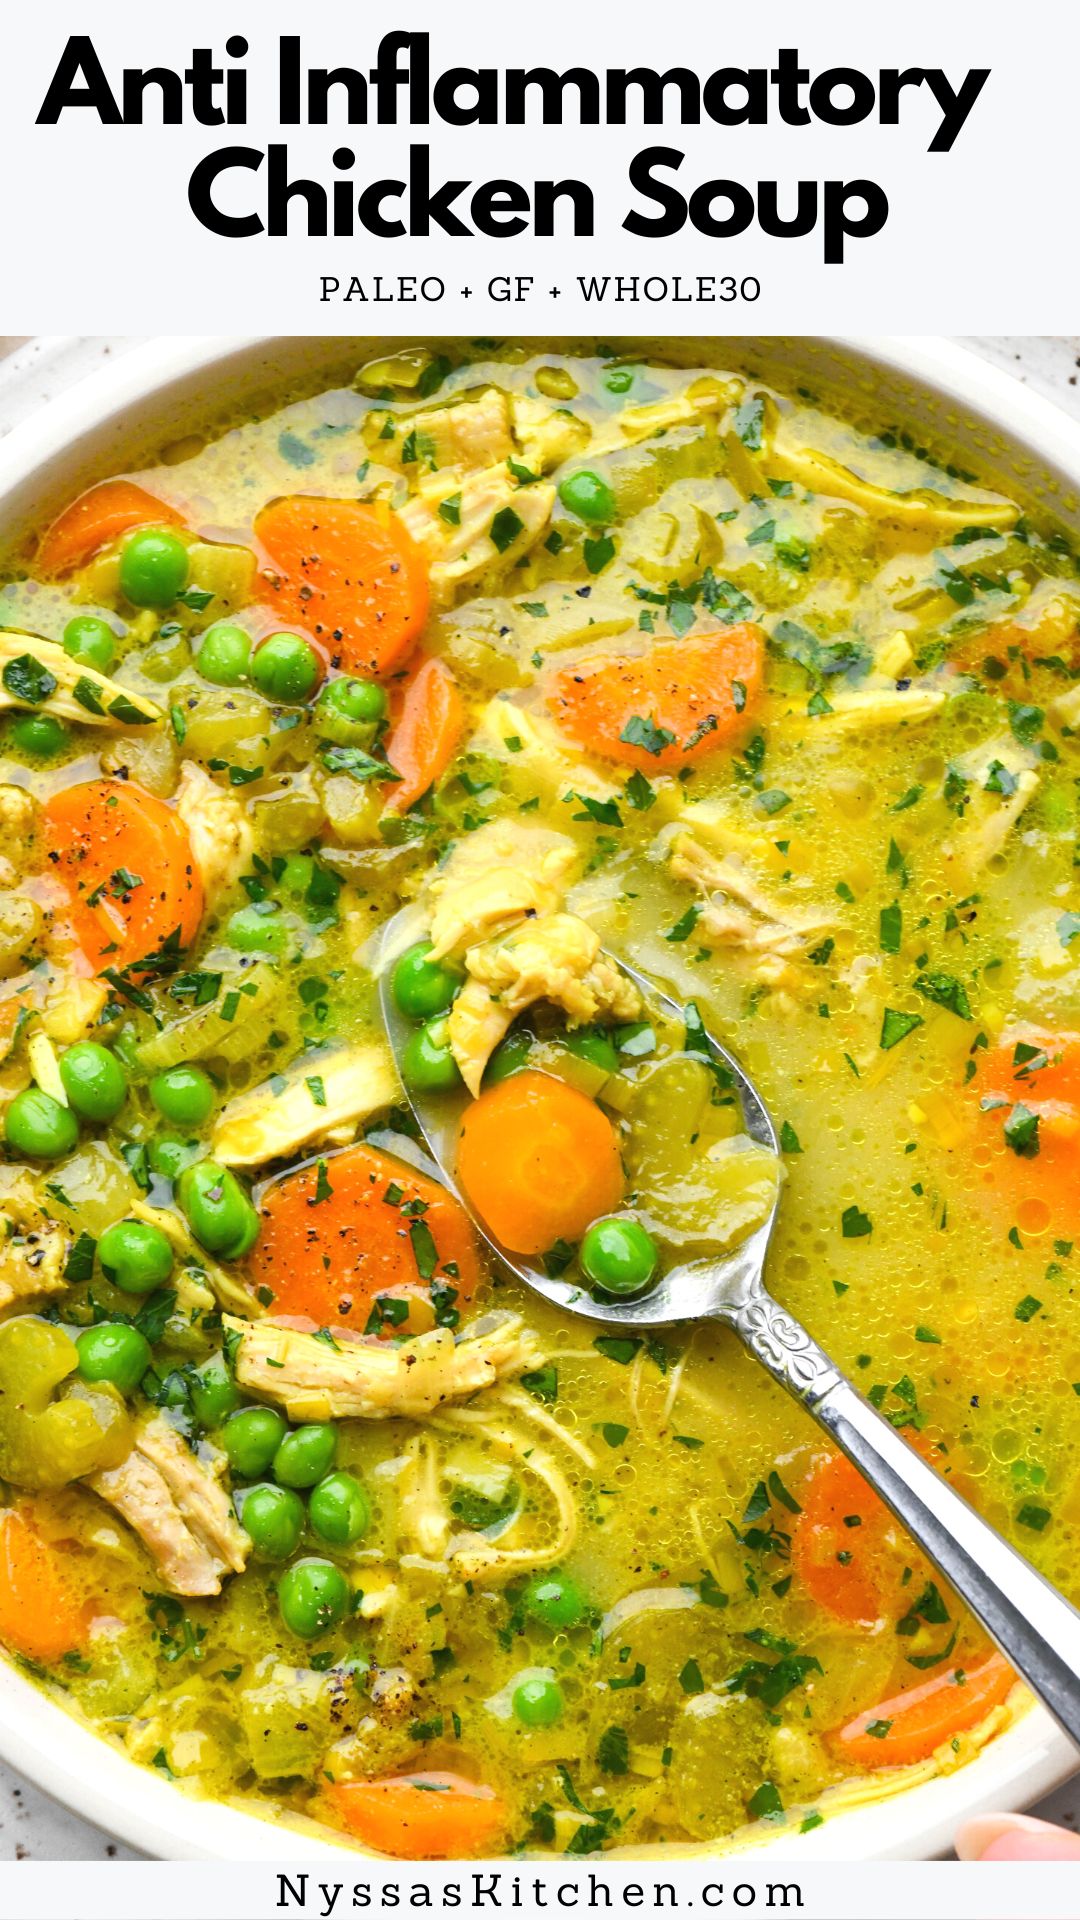 This anti inflammatory turmeric chicken soup is made in one pot with leeks, onions, carrots, celery, peas, chicken, chicken broth, coconut milk, and flavorful spices. It is packed with nutrients, and perfect for meal prep or family dinner. The best way to warm up with when you need some homemade nourishment! Whole30, paleo, gluten free, dairy free.